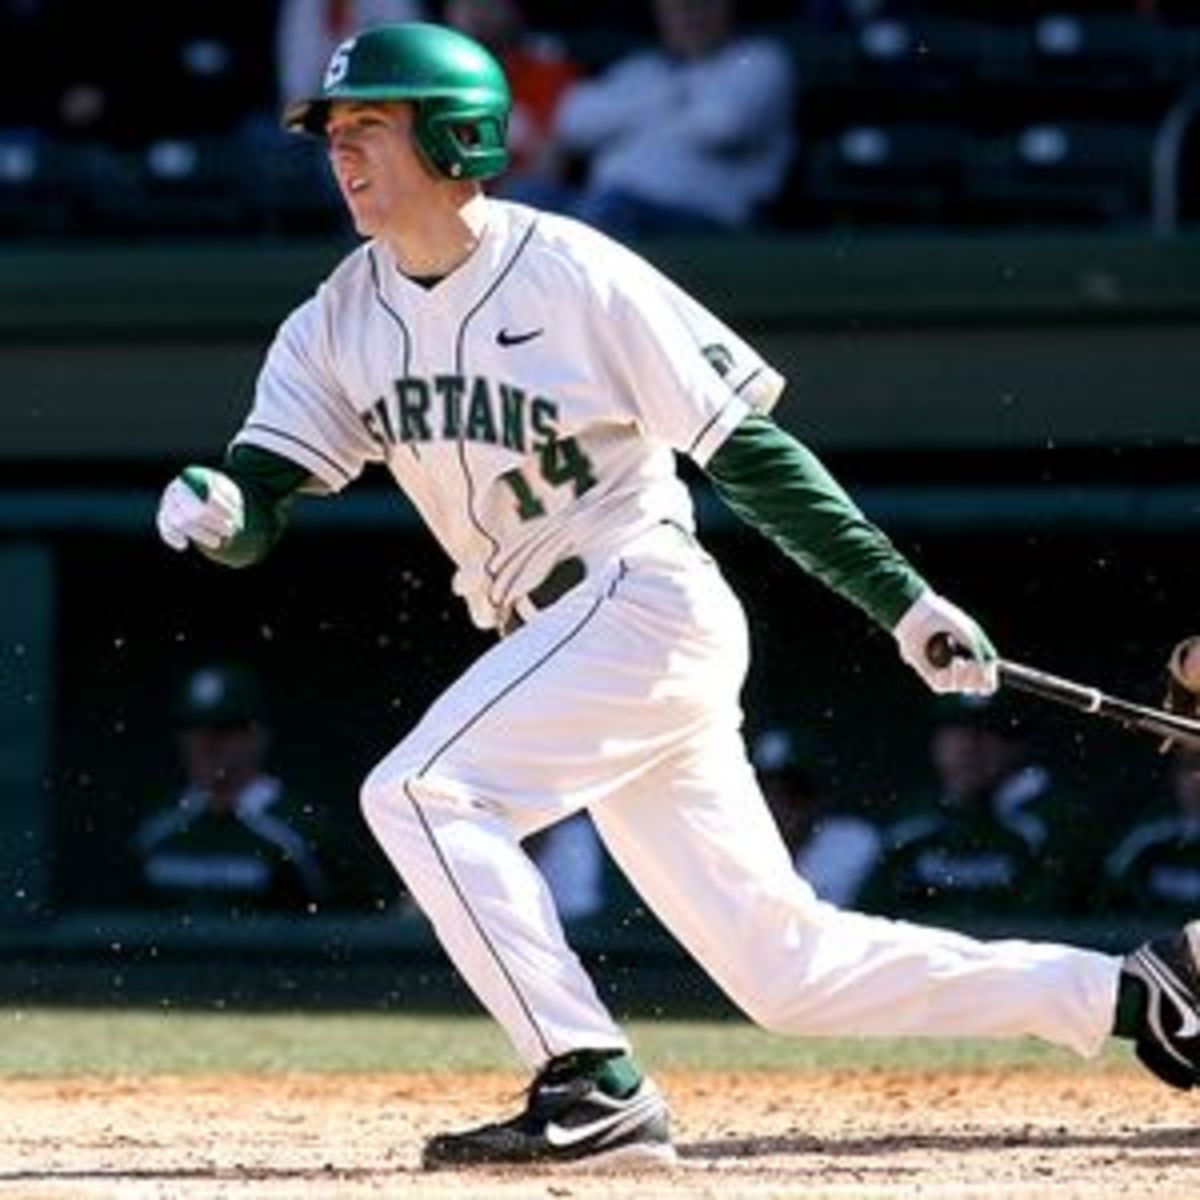 Brandon Eckerle and the Michigan State Spartan baseball team are off to a hot start in 2011.